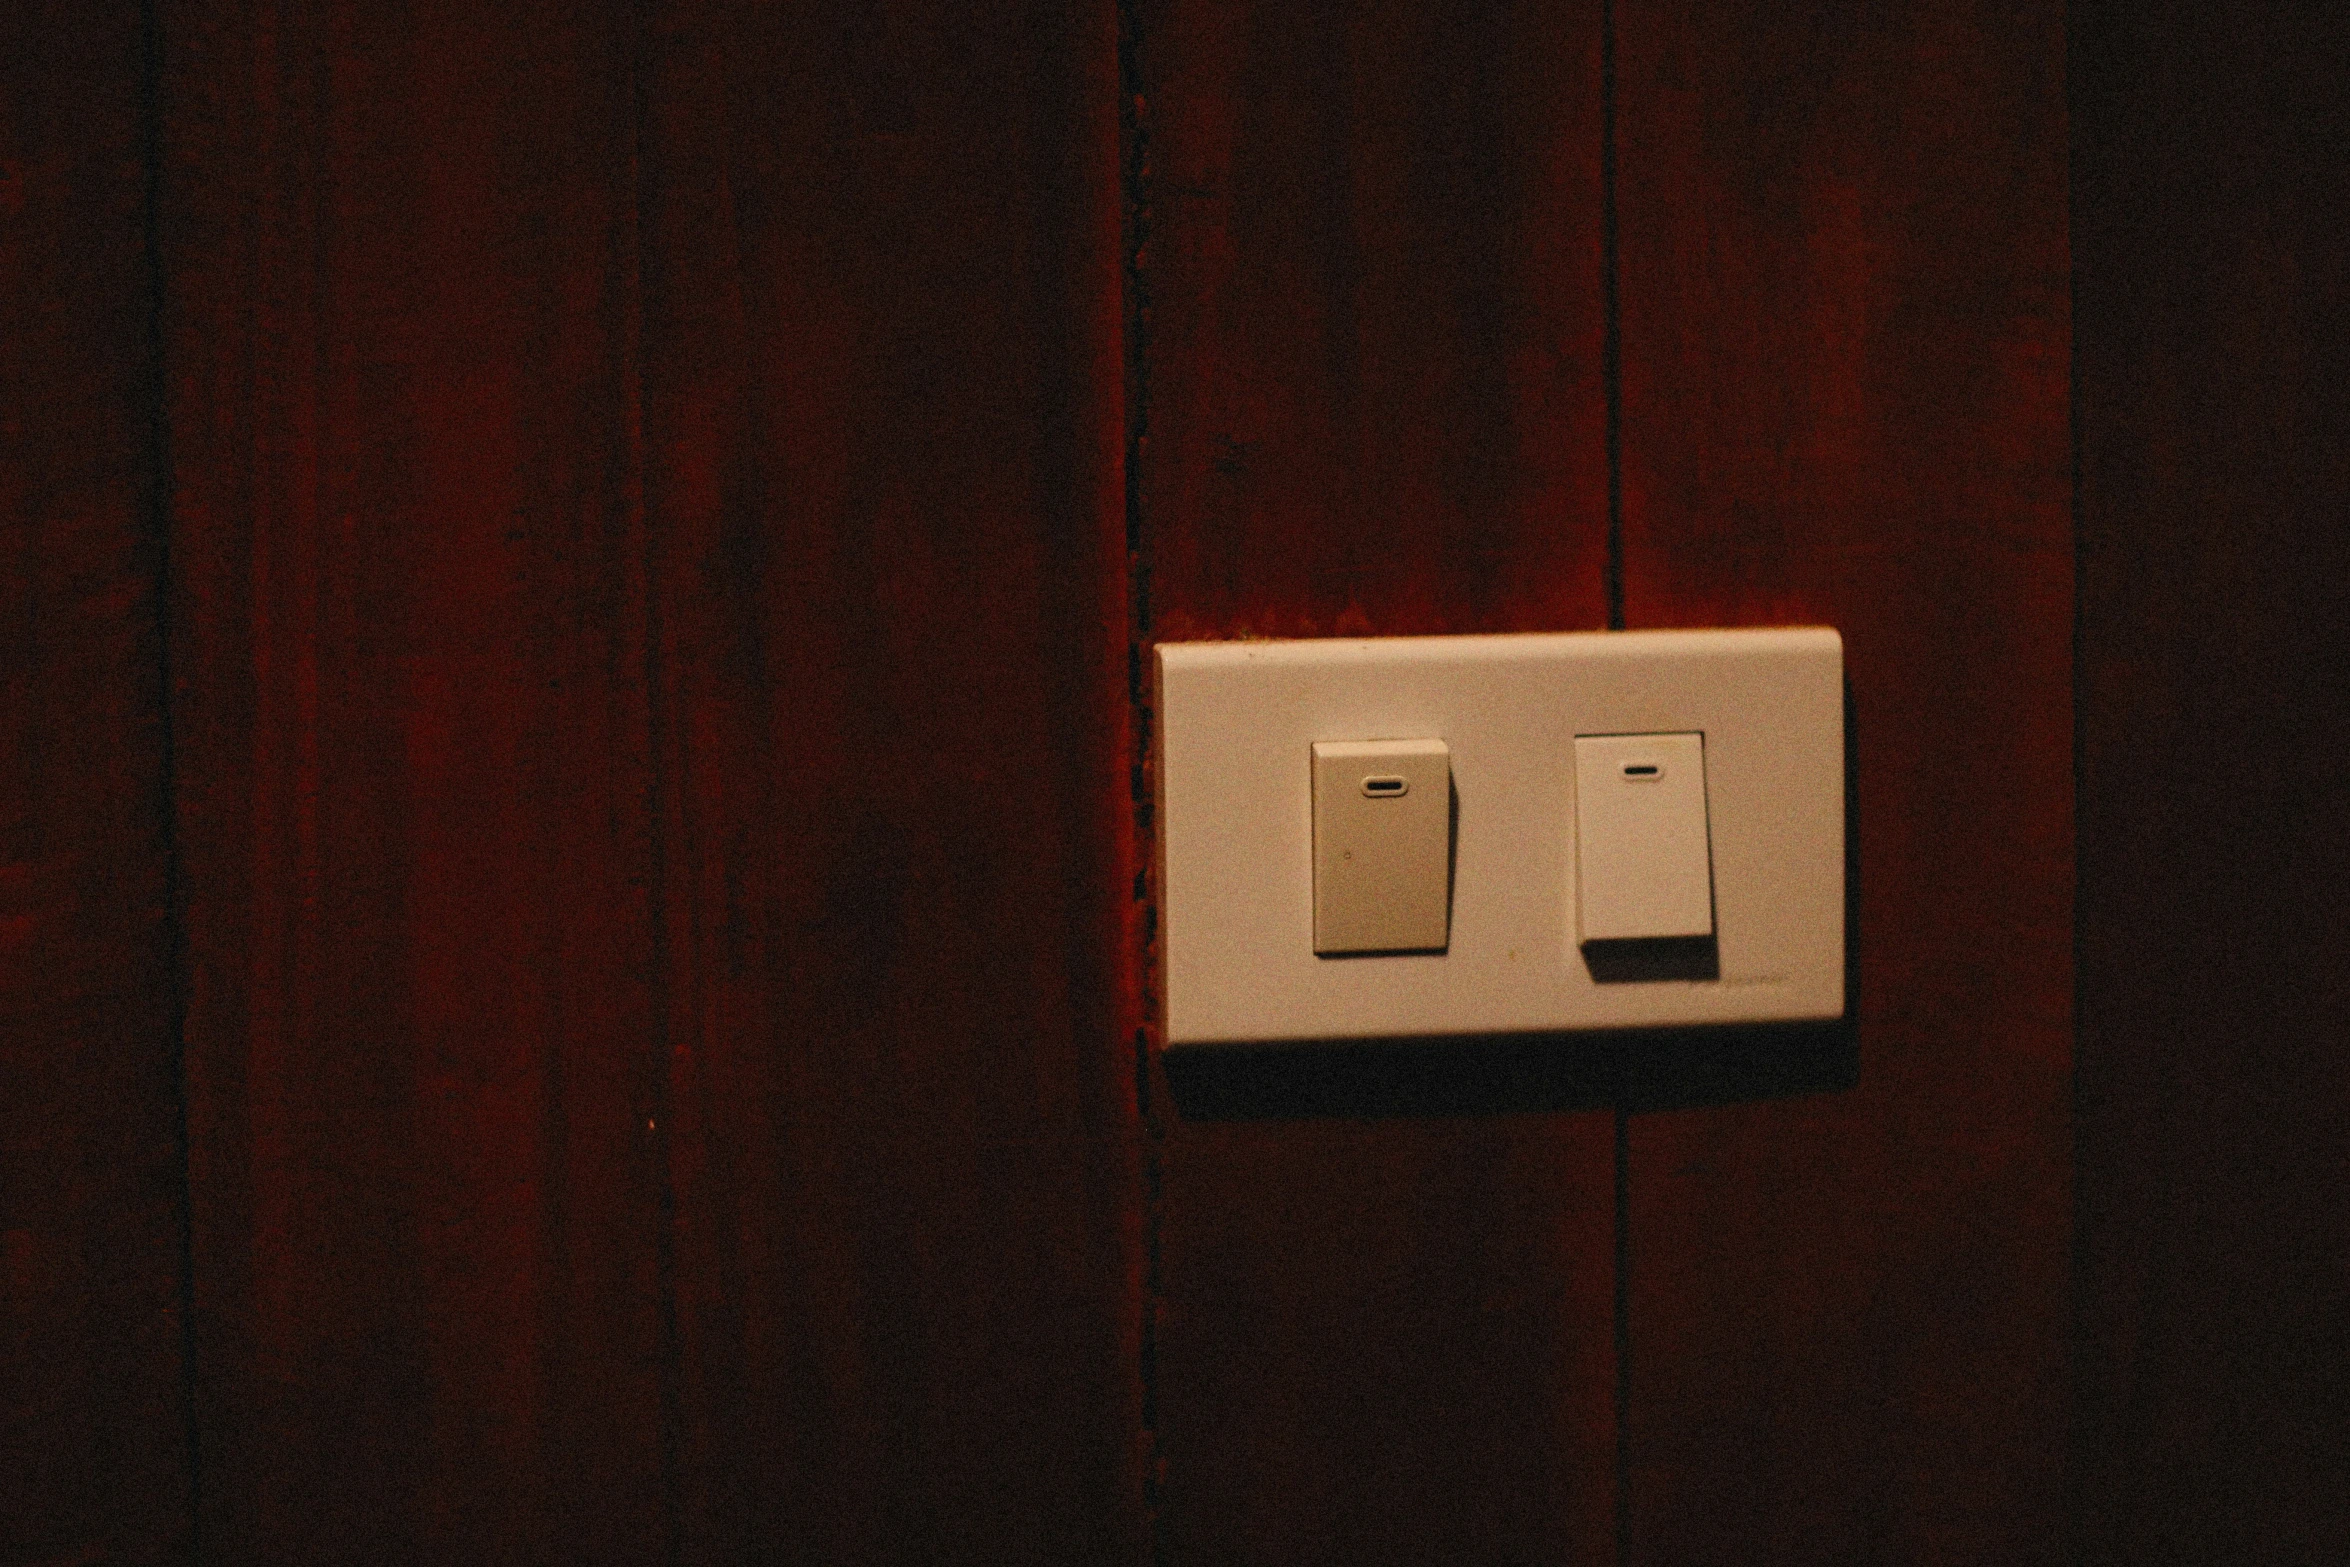 there is a white light switch on a wooden wall